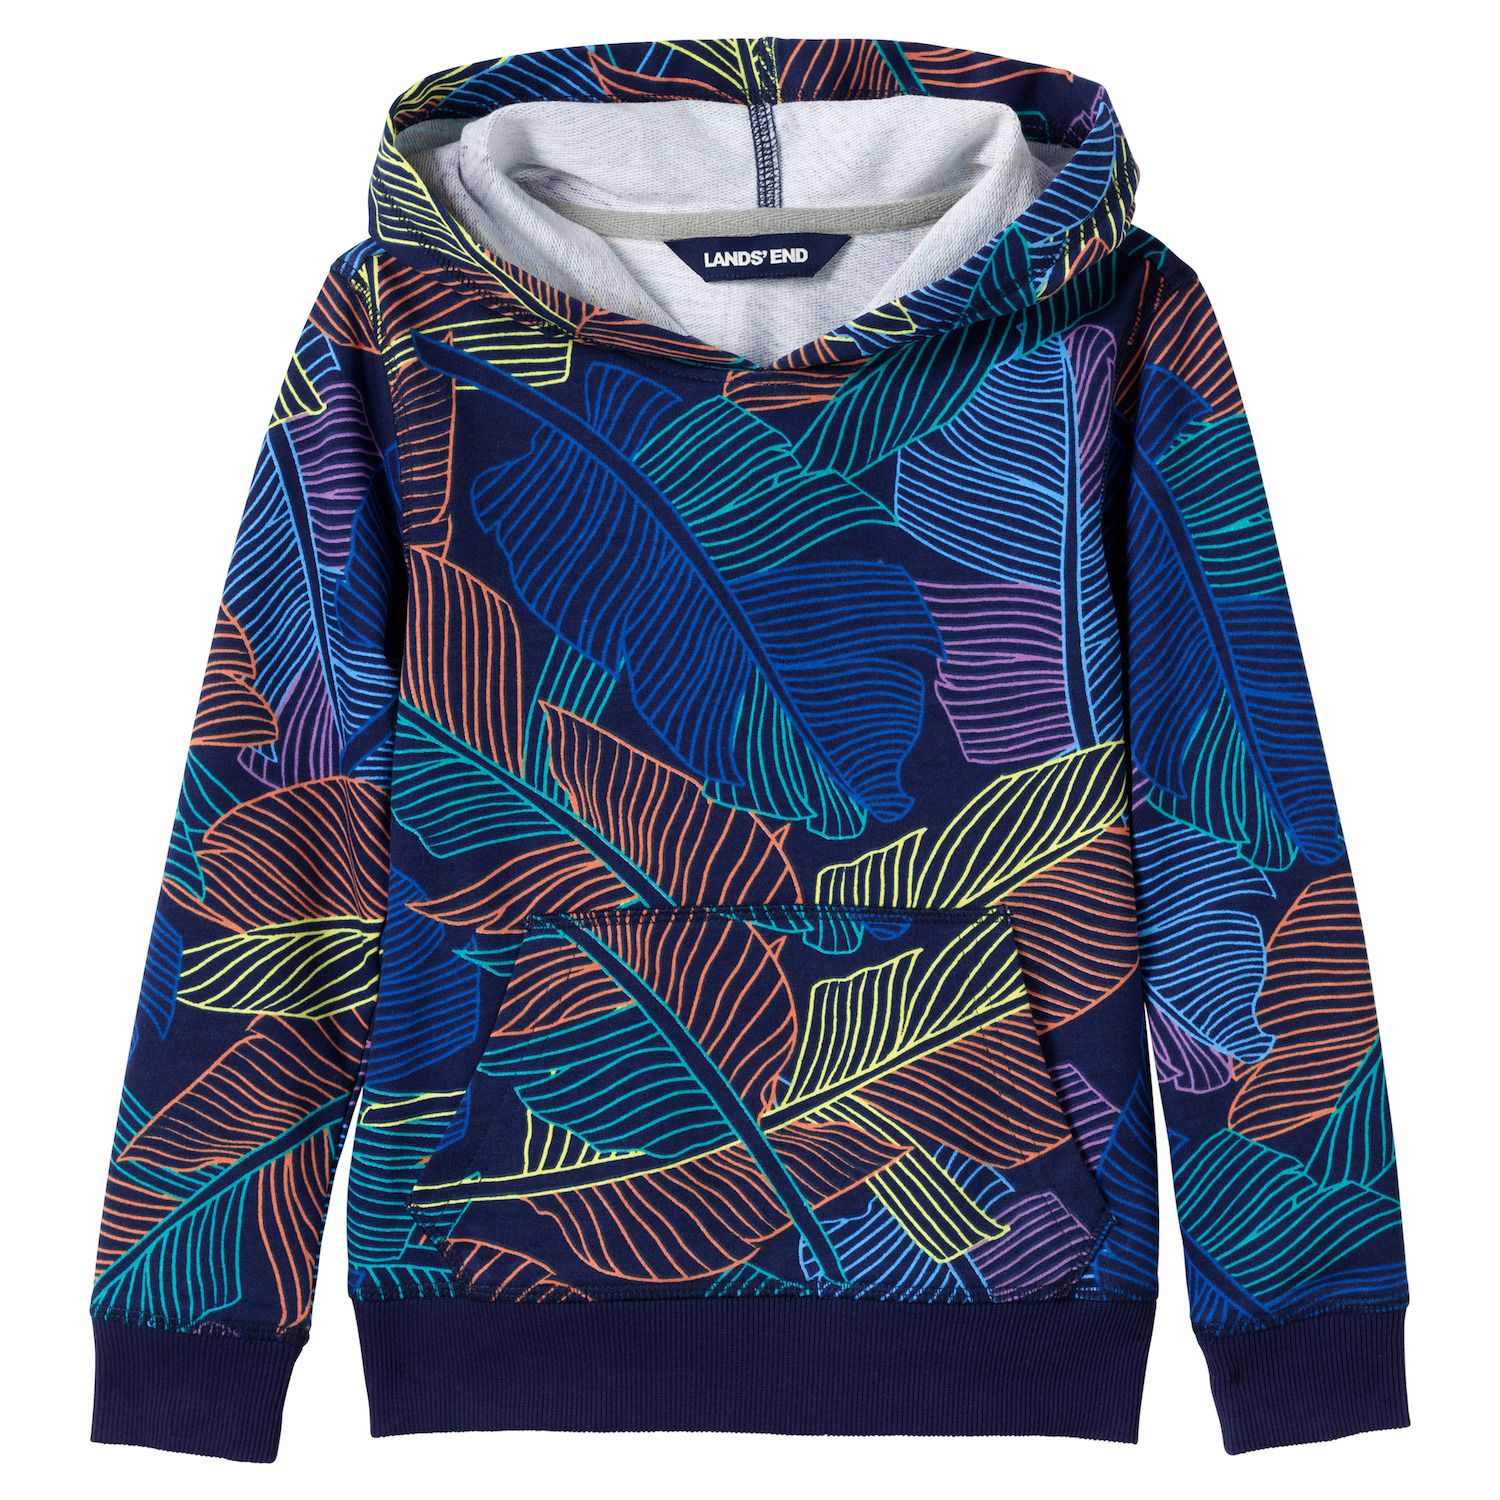 Image for Lands' End Boys 8-20 Long Sleeve Pattern Pull Over Hoodie at Kohl's.